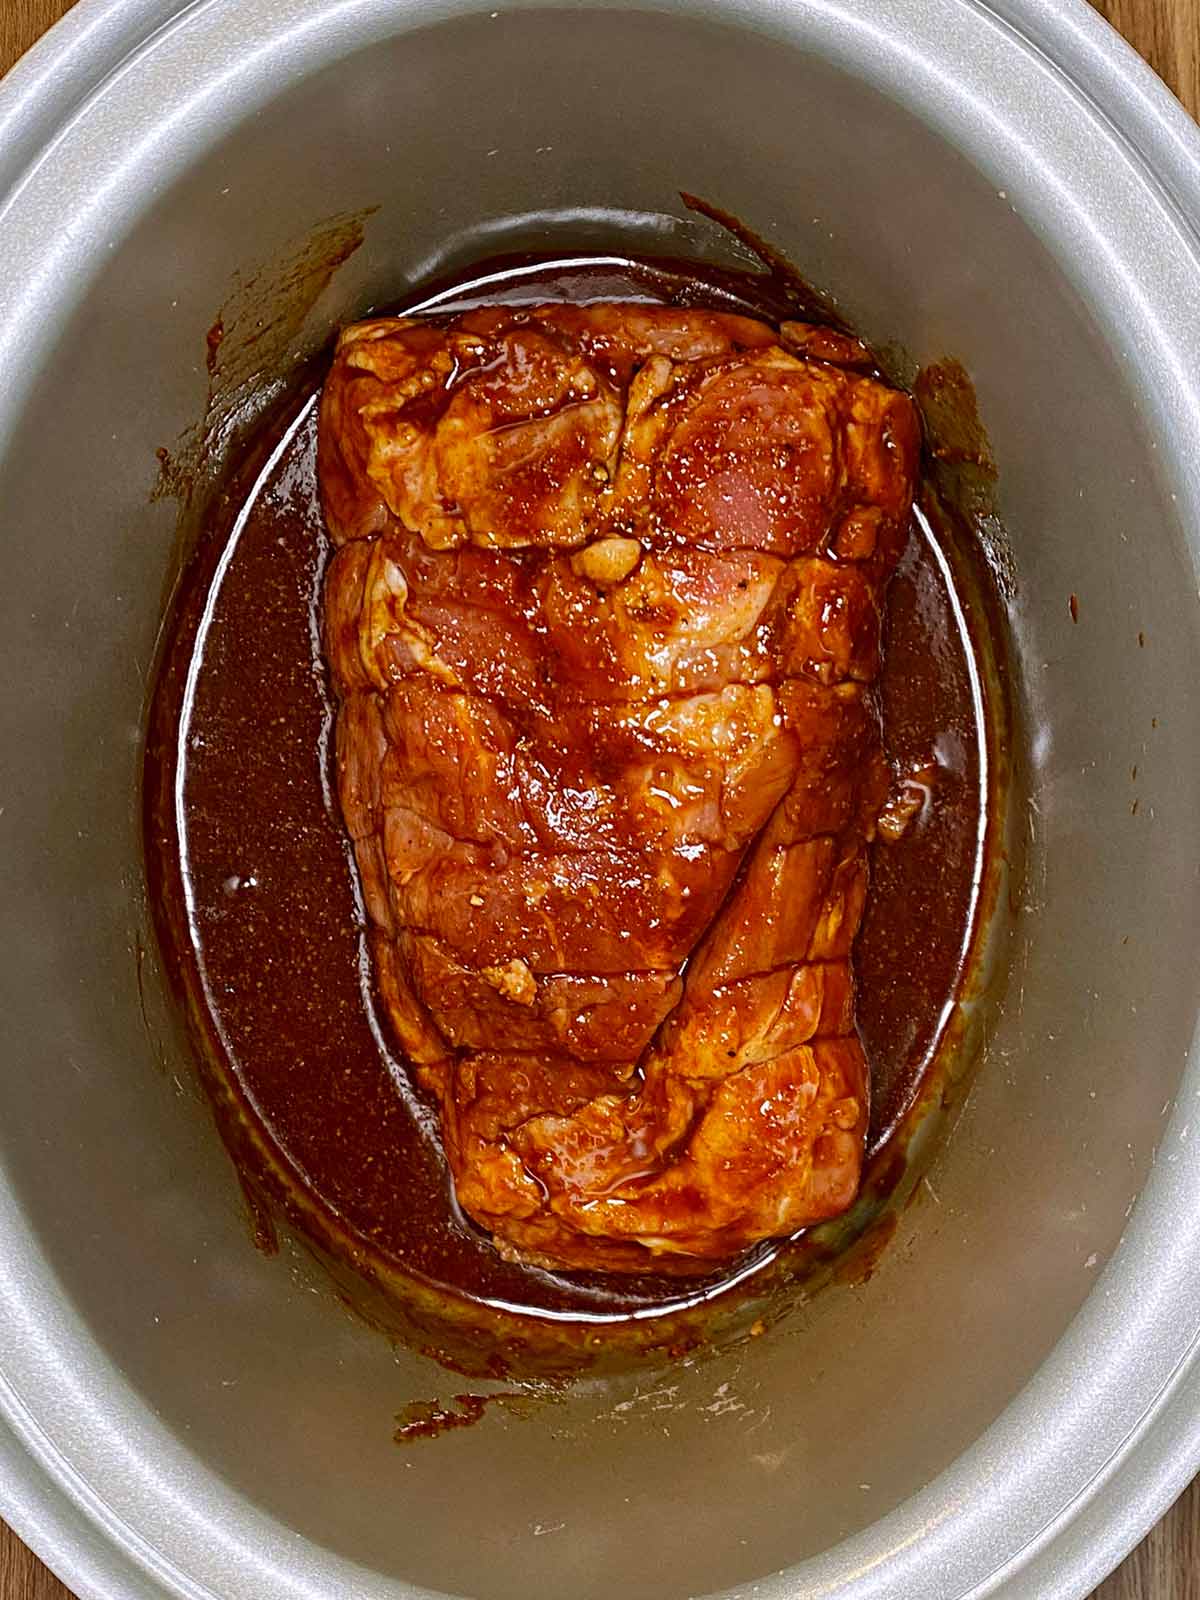 Pork shoulder in a slow cooker with marinade poured over it.